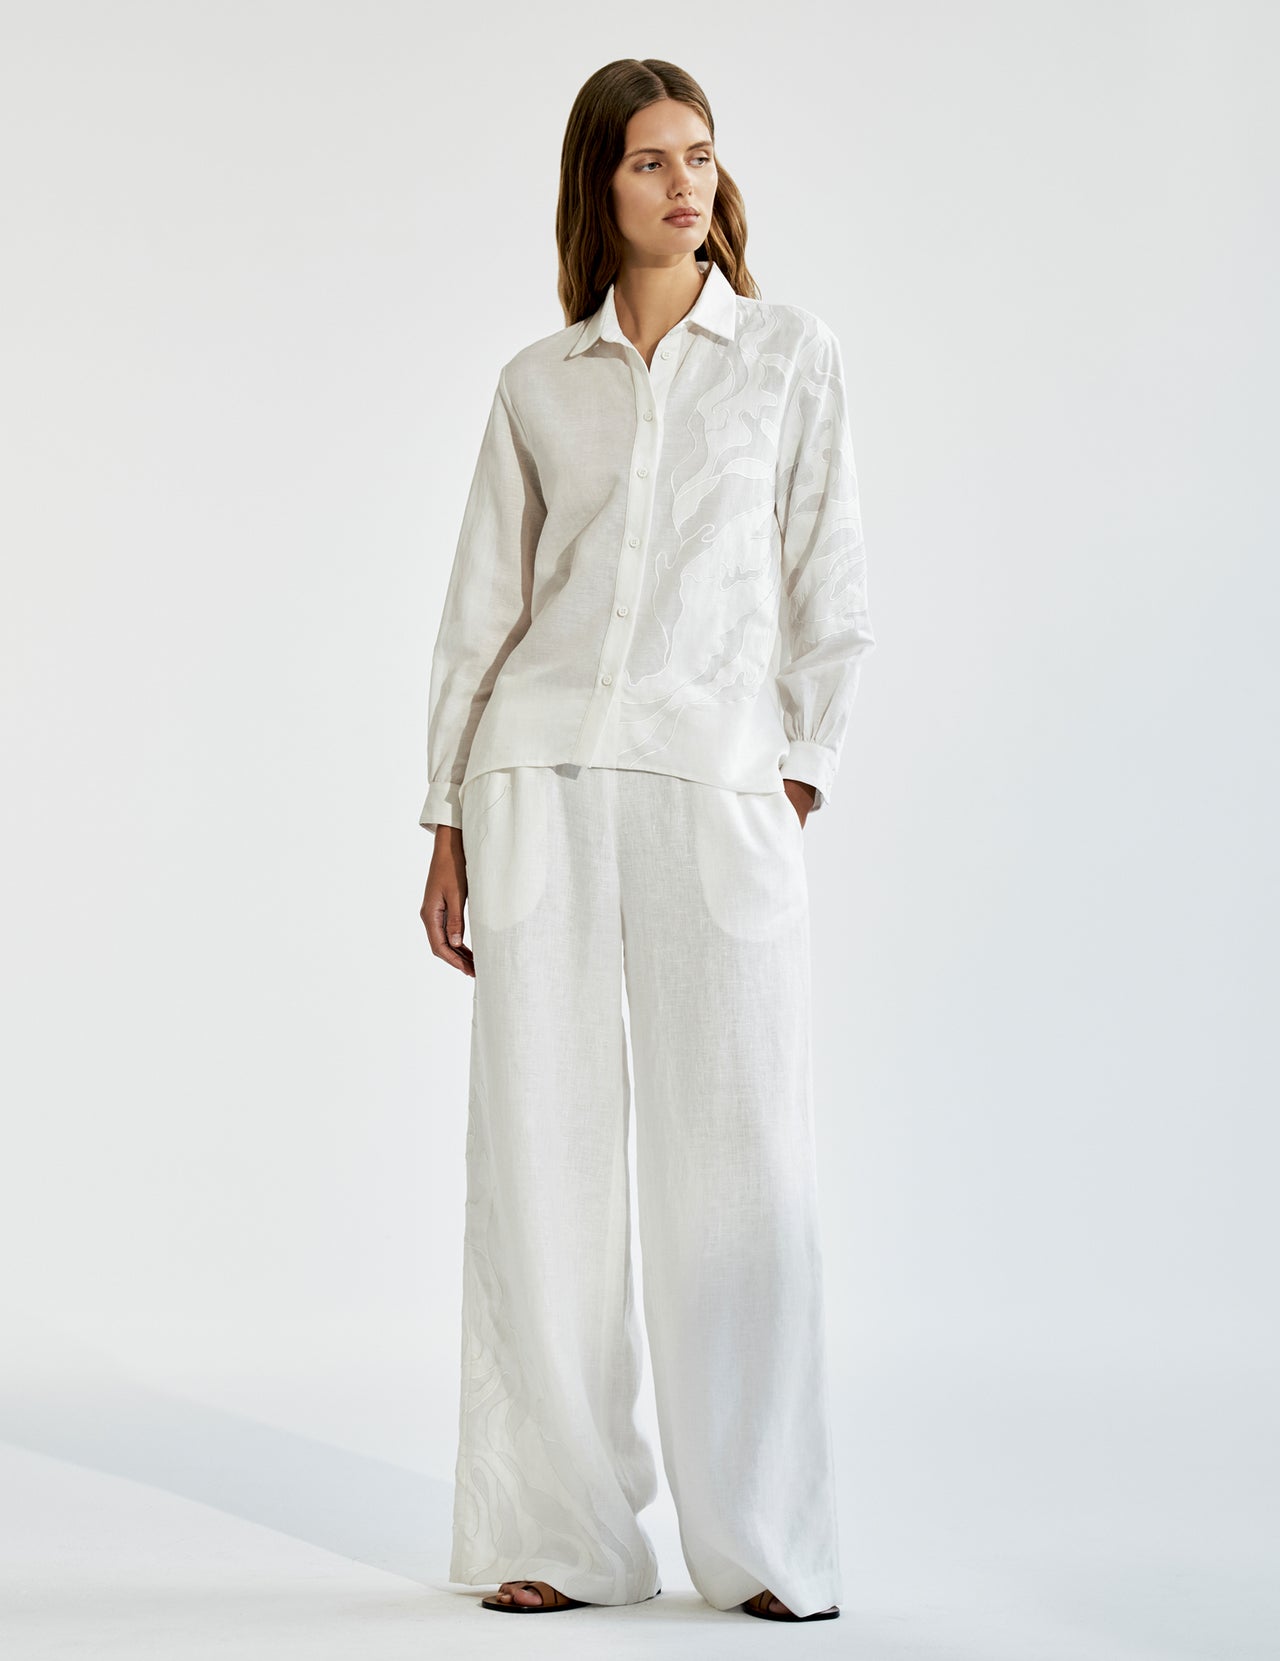  White Linen Wide Leg Drawstring Trousers with Cutwork Appliqué 